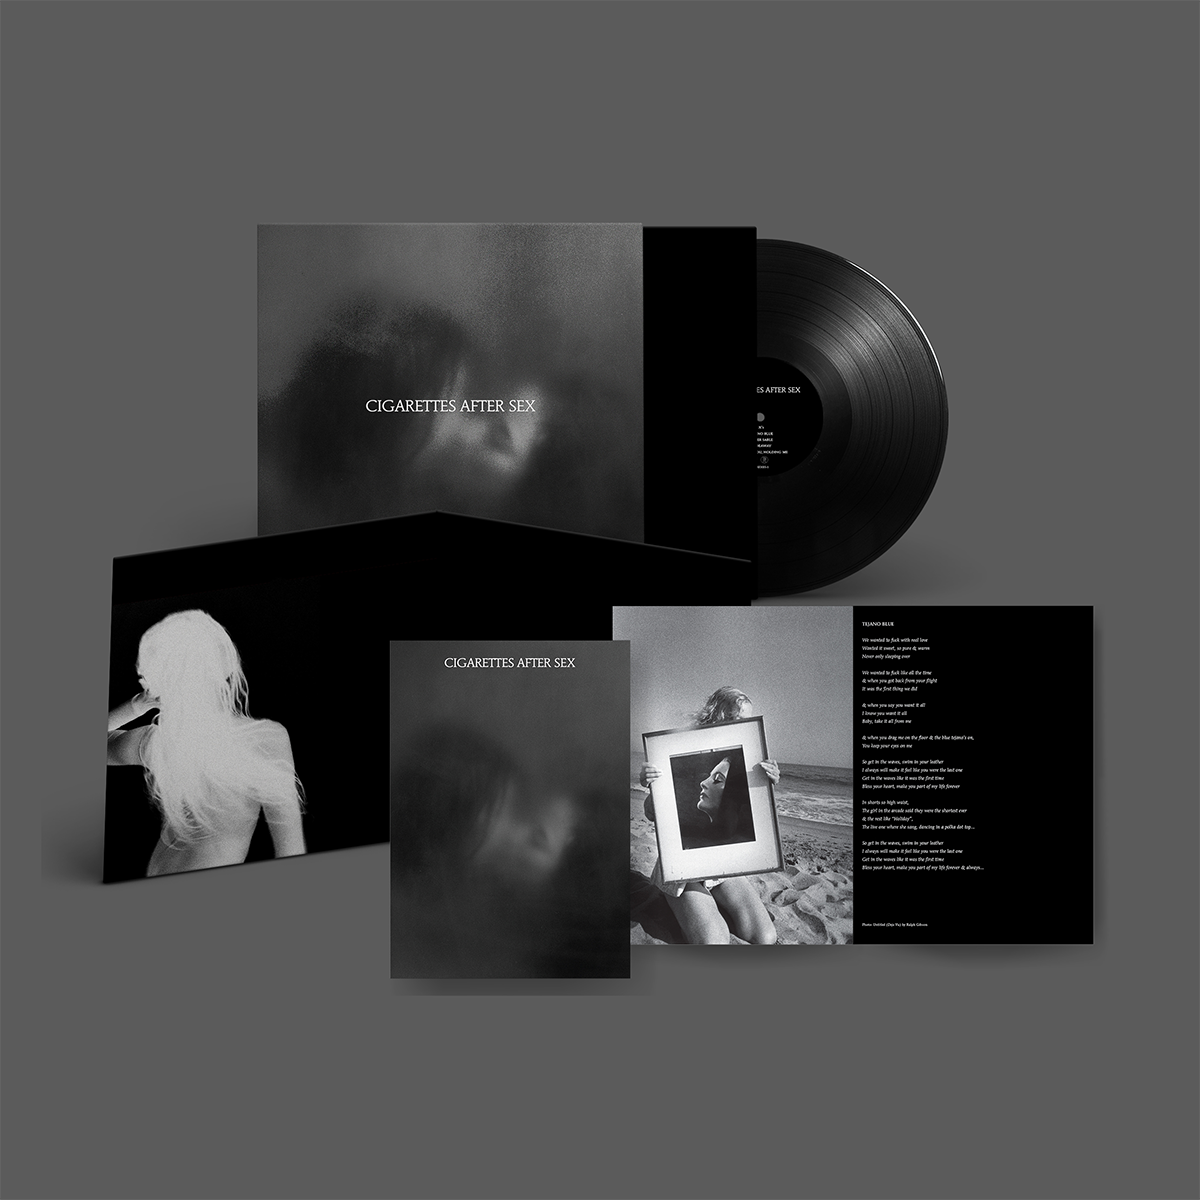 X's: Limited Deluxe Vinyl LP + Signed Print